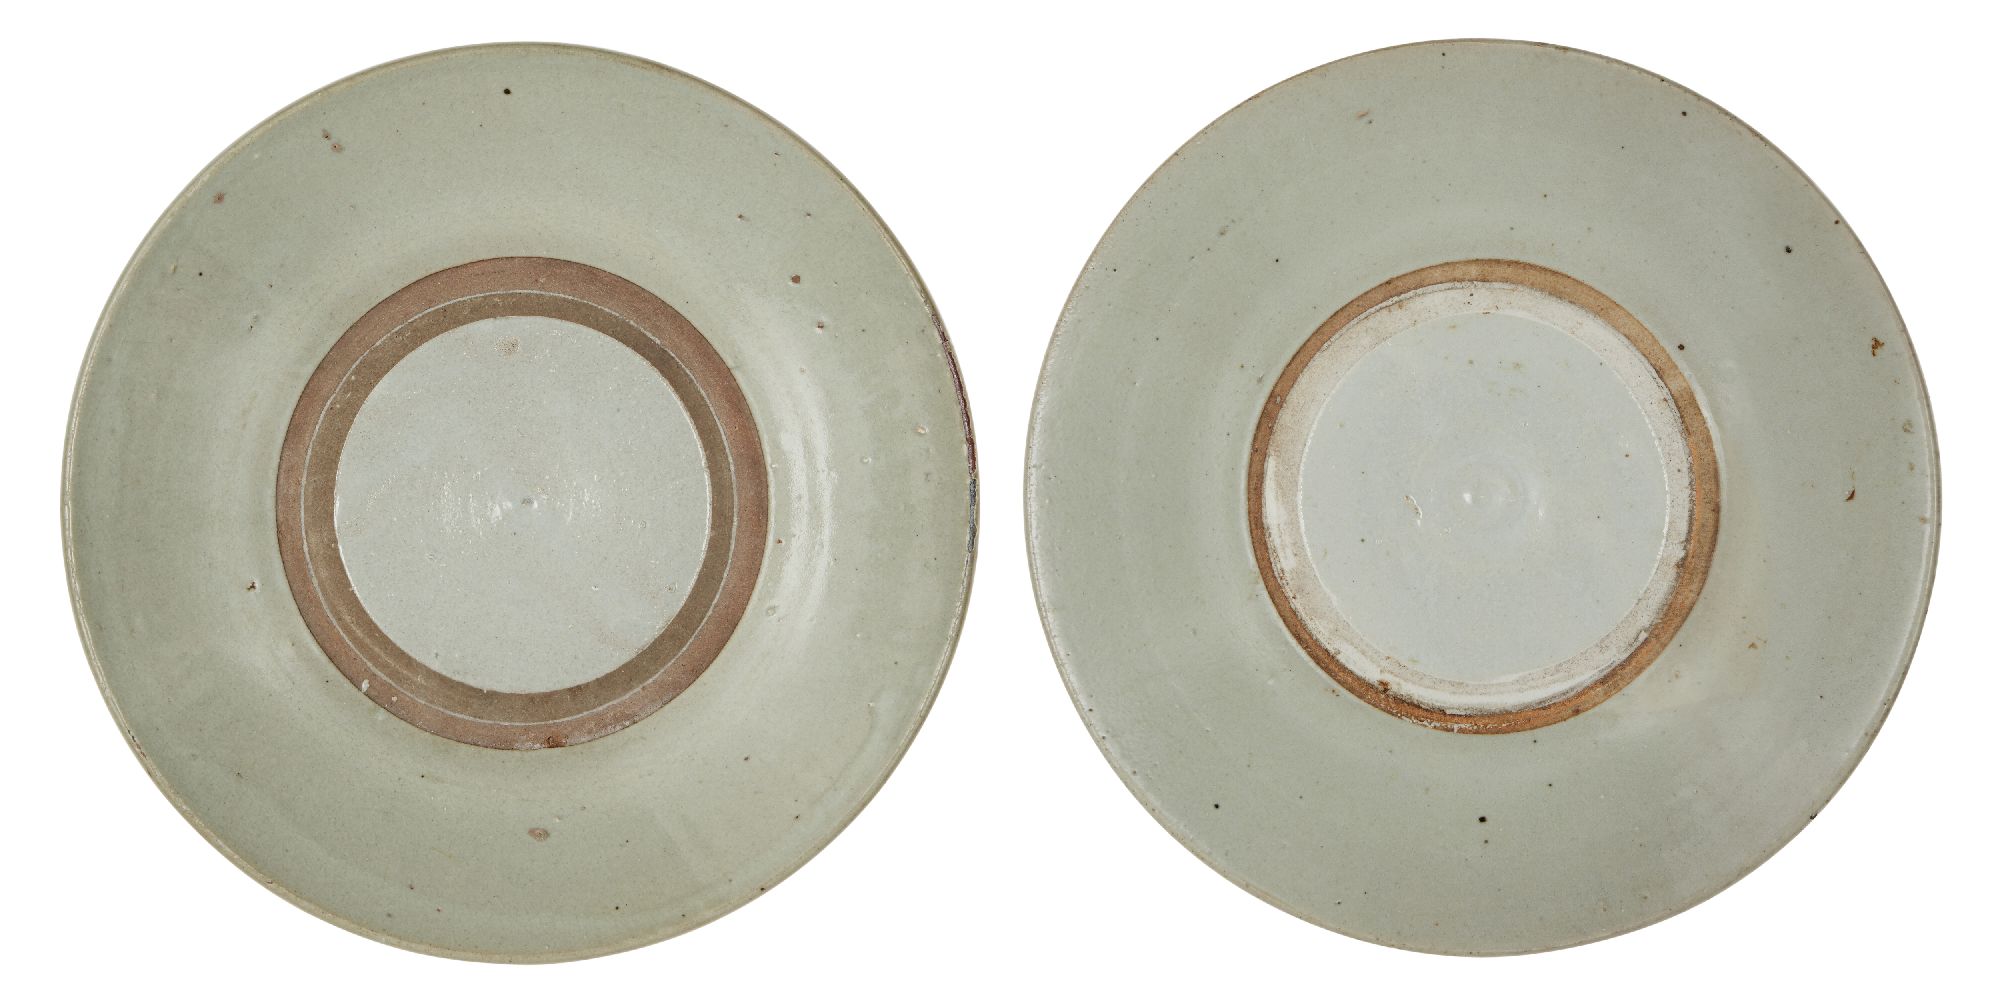 Two Chinese porcelain shallow dishes, Ming dynasty, 17th century, covered in a pale grey glaze, with